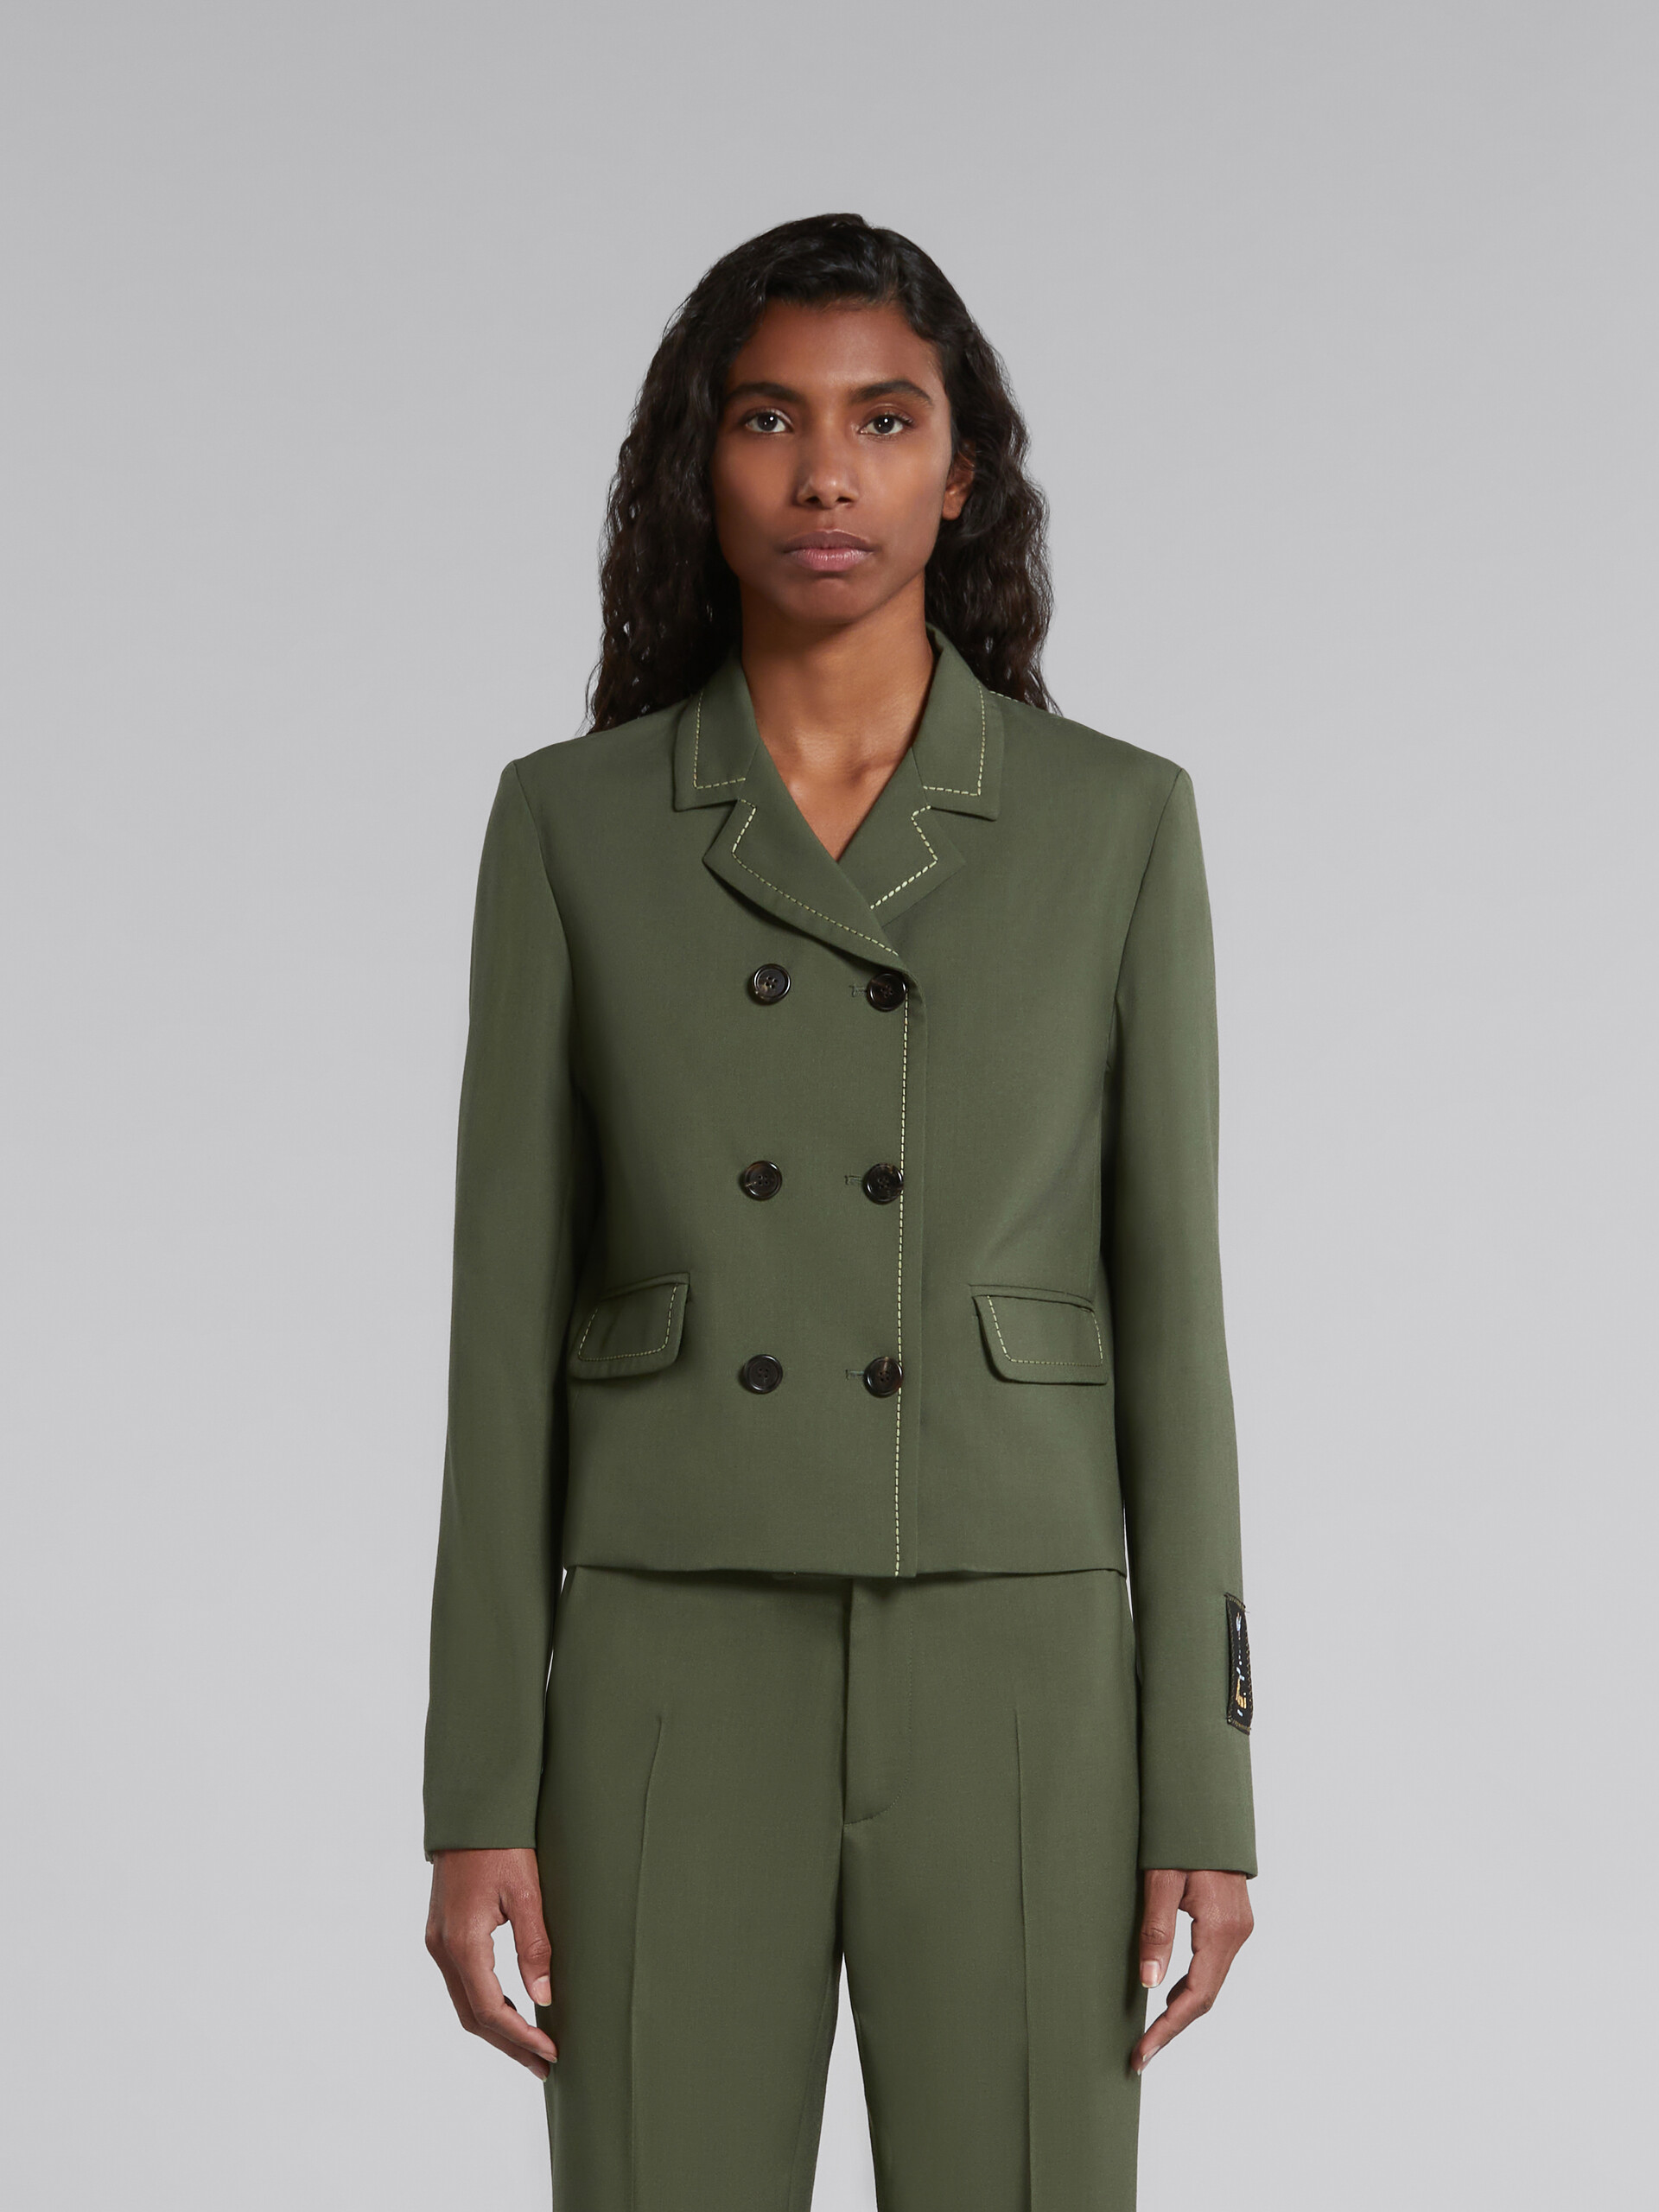 Green wool jacket with contrast stitching - Jackets - Image 2